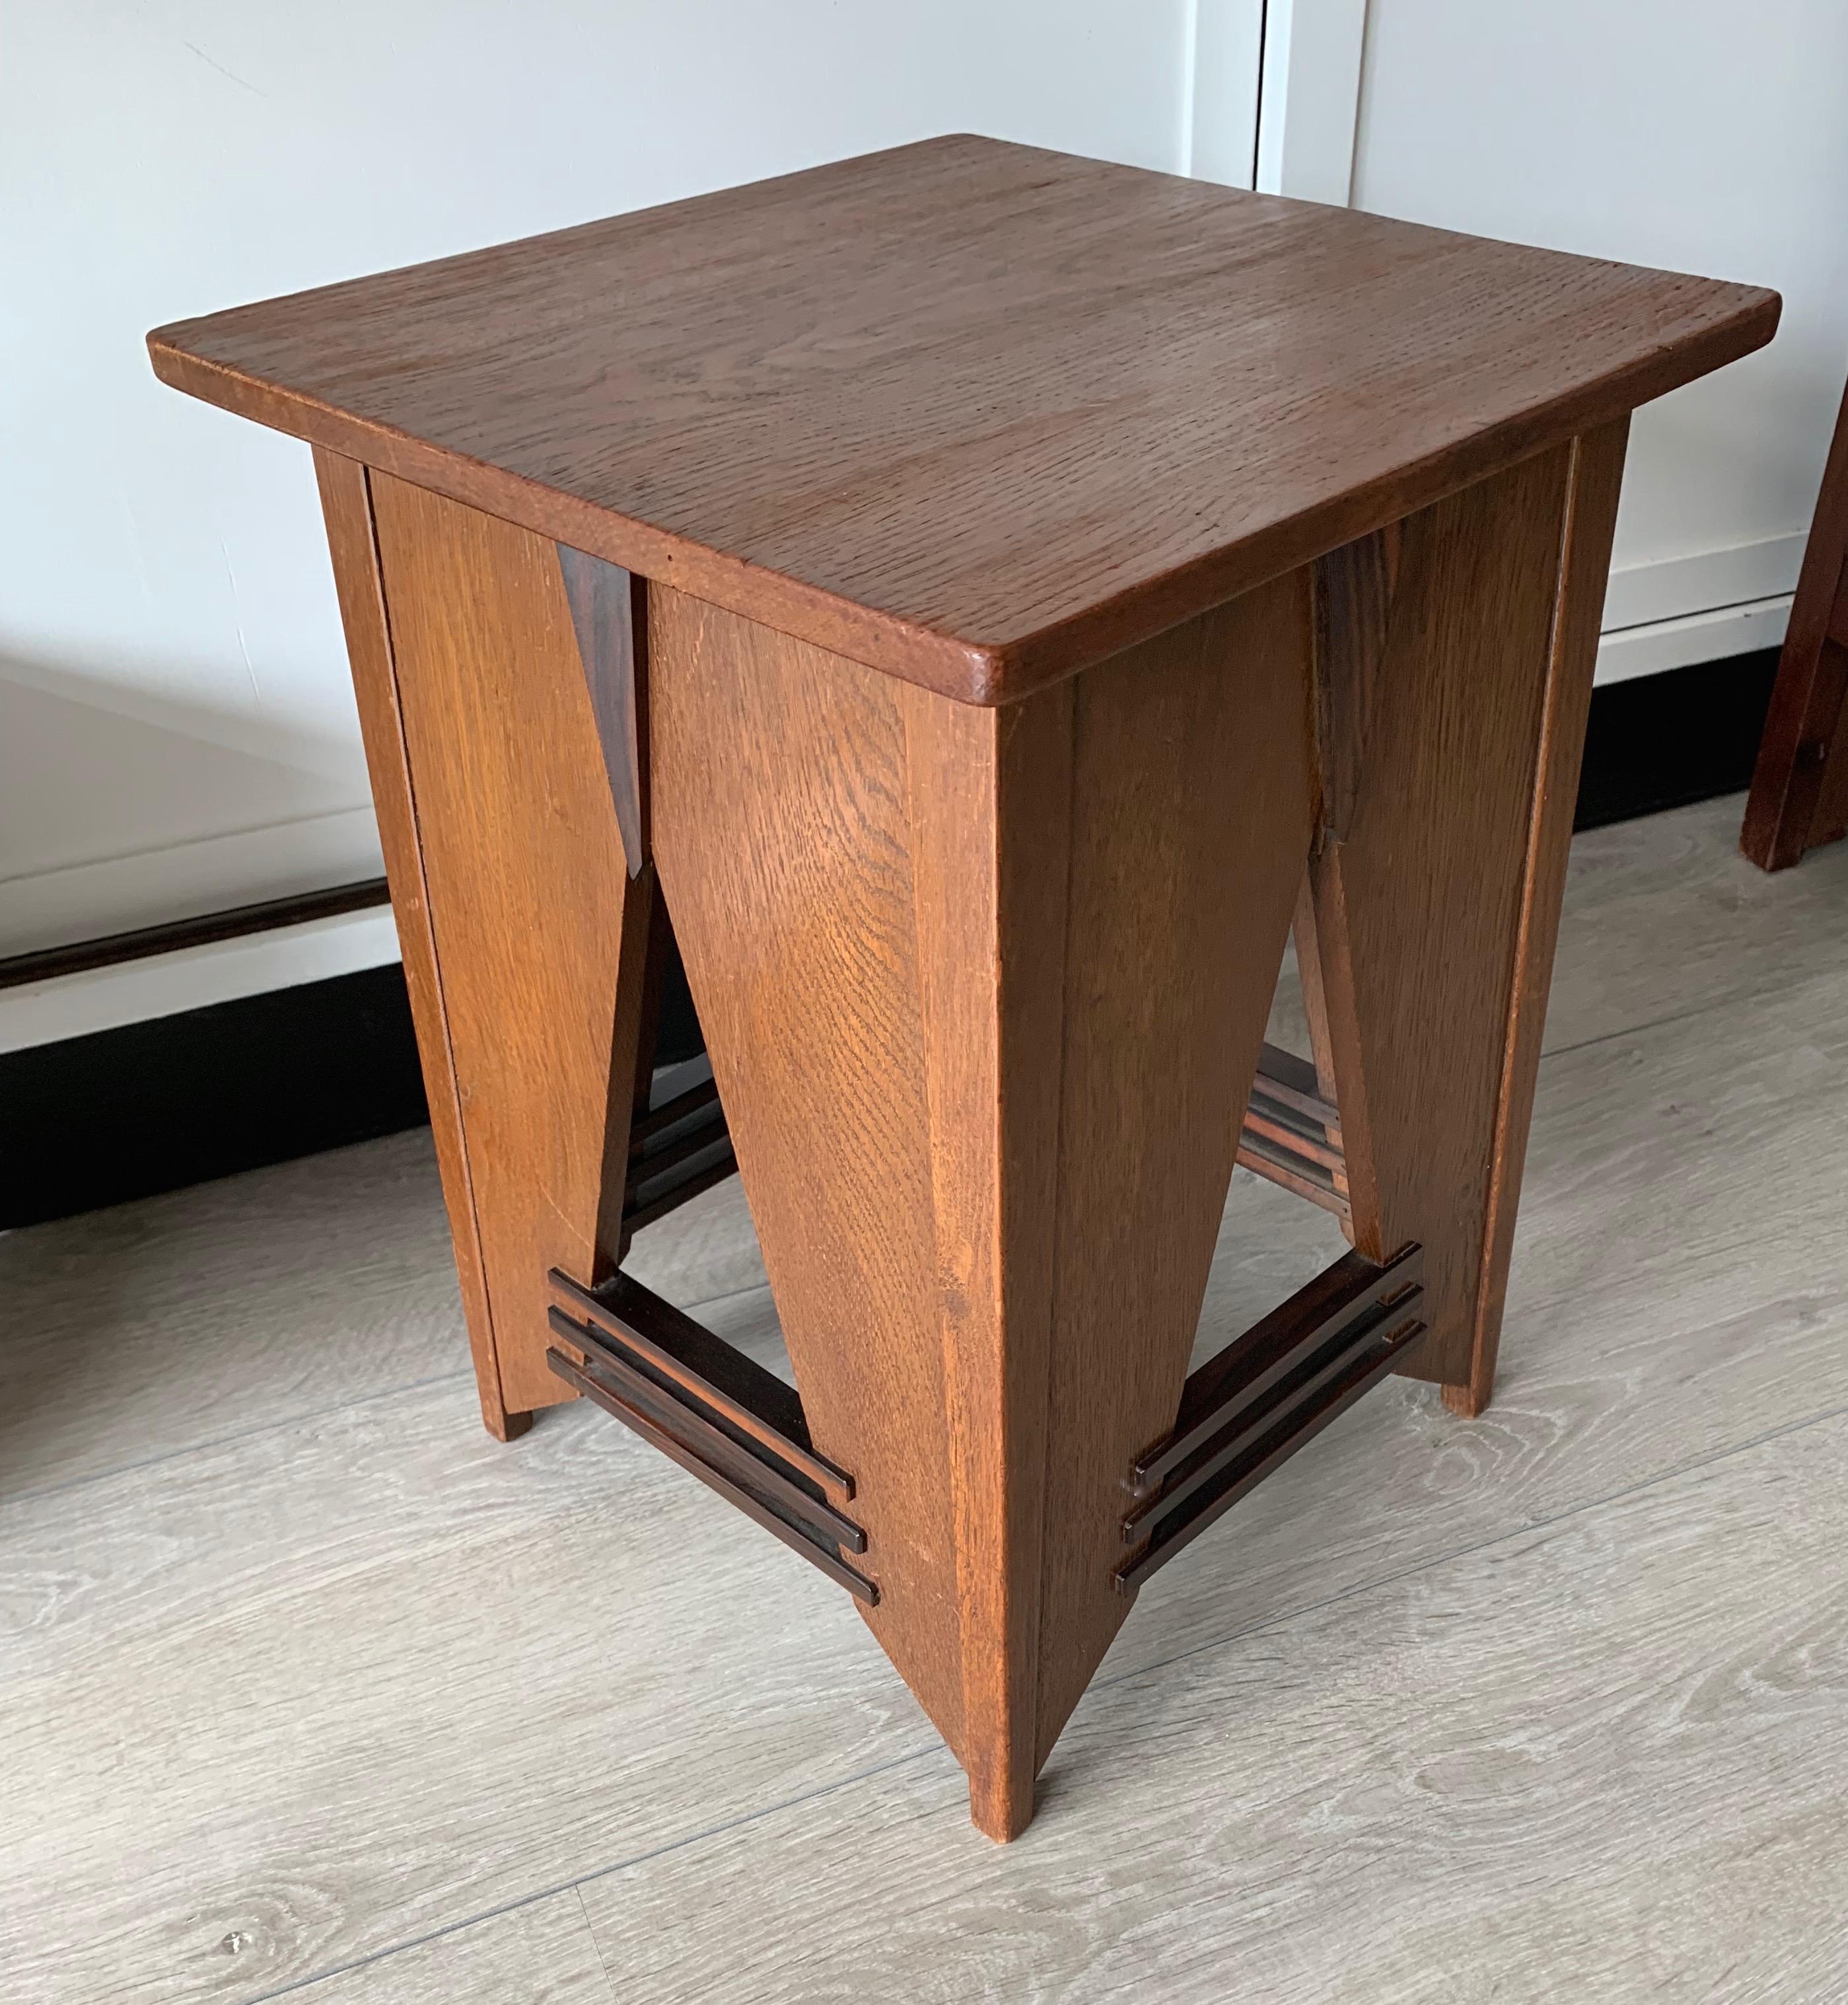 Striking design and excellent quality Dutch Arts & Crafts School table with a wonderful patina.

Designed P.E.L.Izeren (1886-1943), Made by Genneper Molen.

If you are a collector of beautifully handcrafted and stylish pieces from the Arts & Crafts